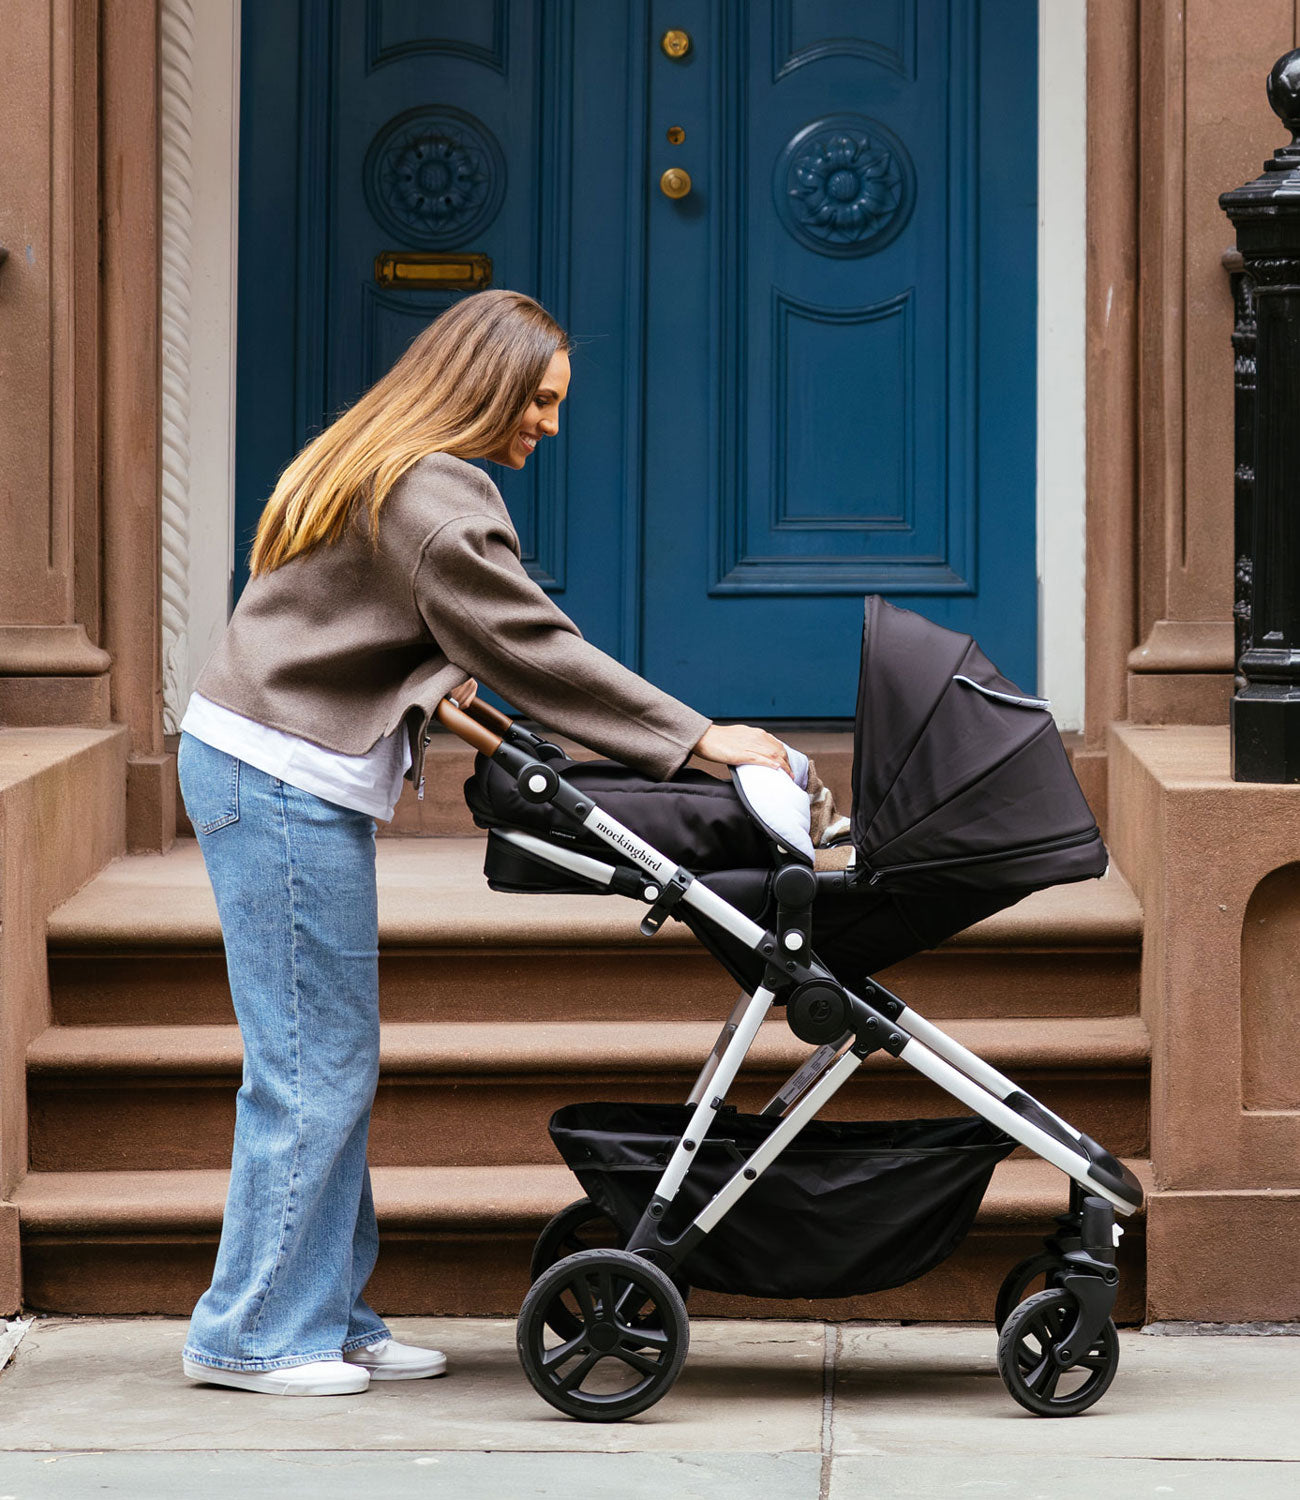 A woman in a brown jacket and jeans pushing a baby stroller near a blue door on a city street.